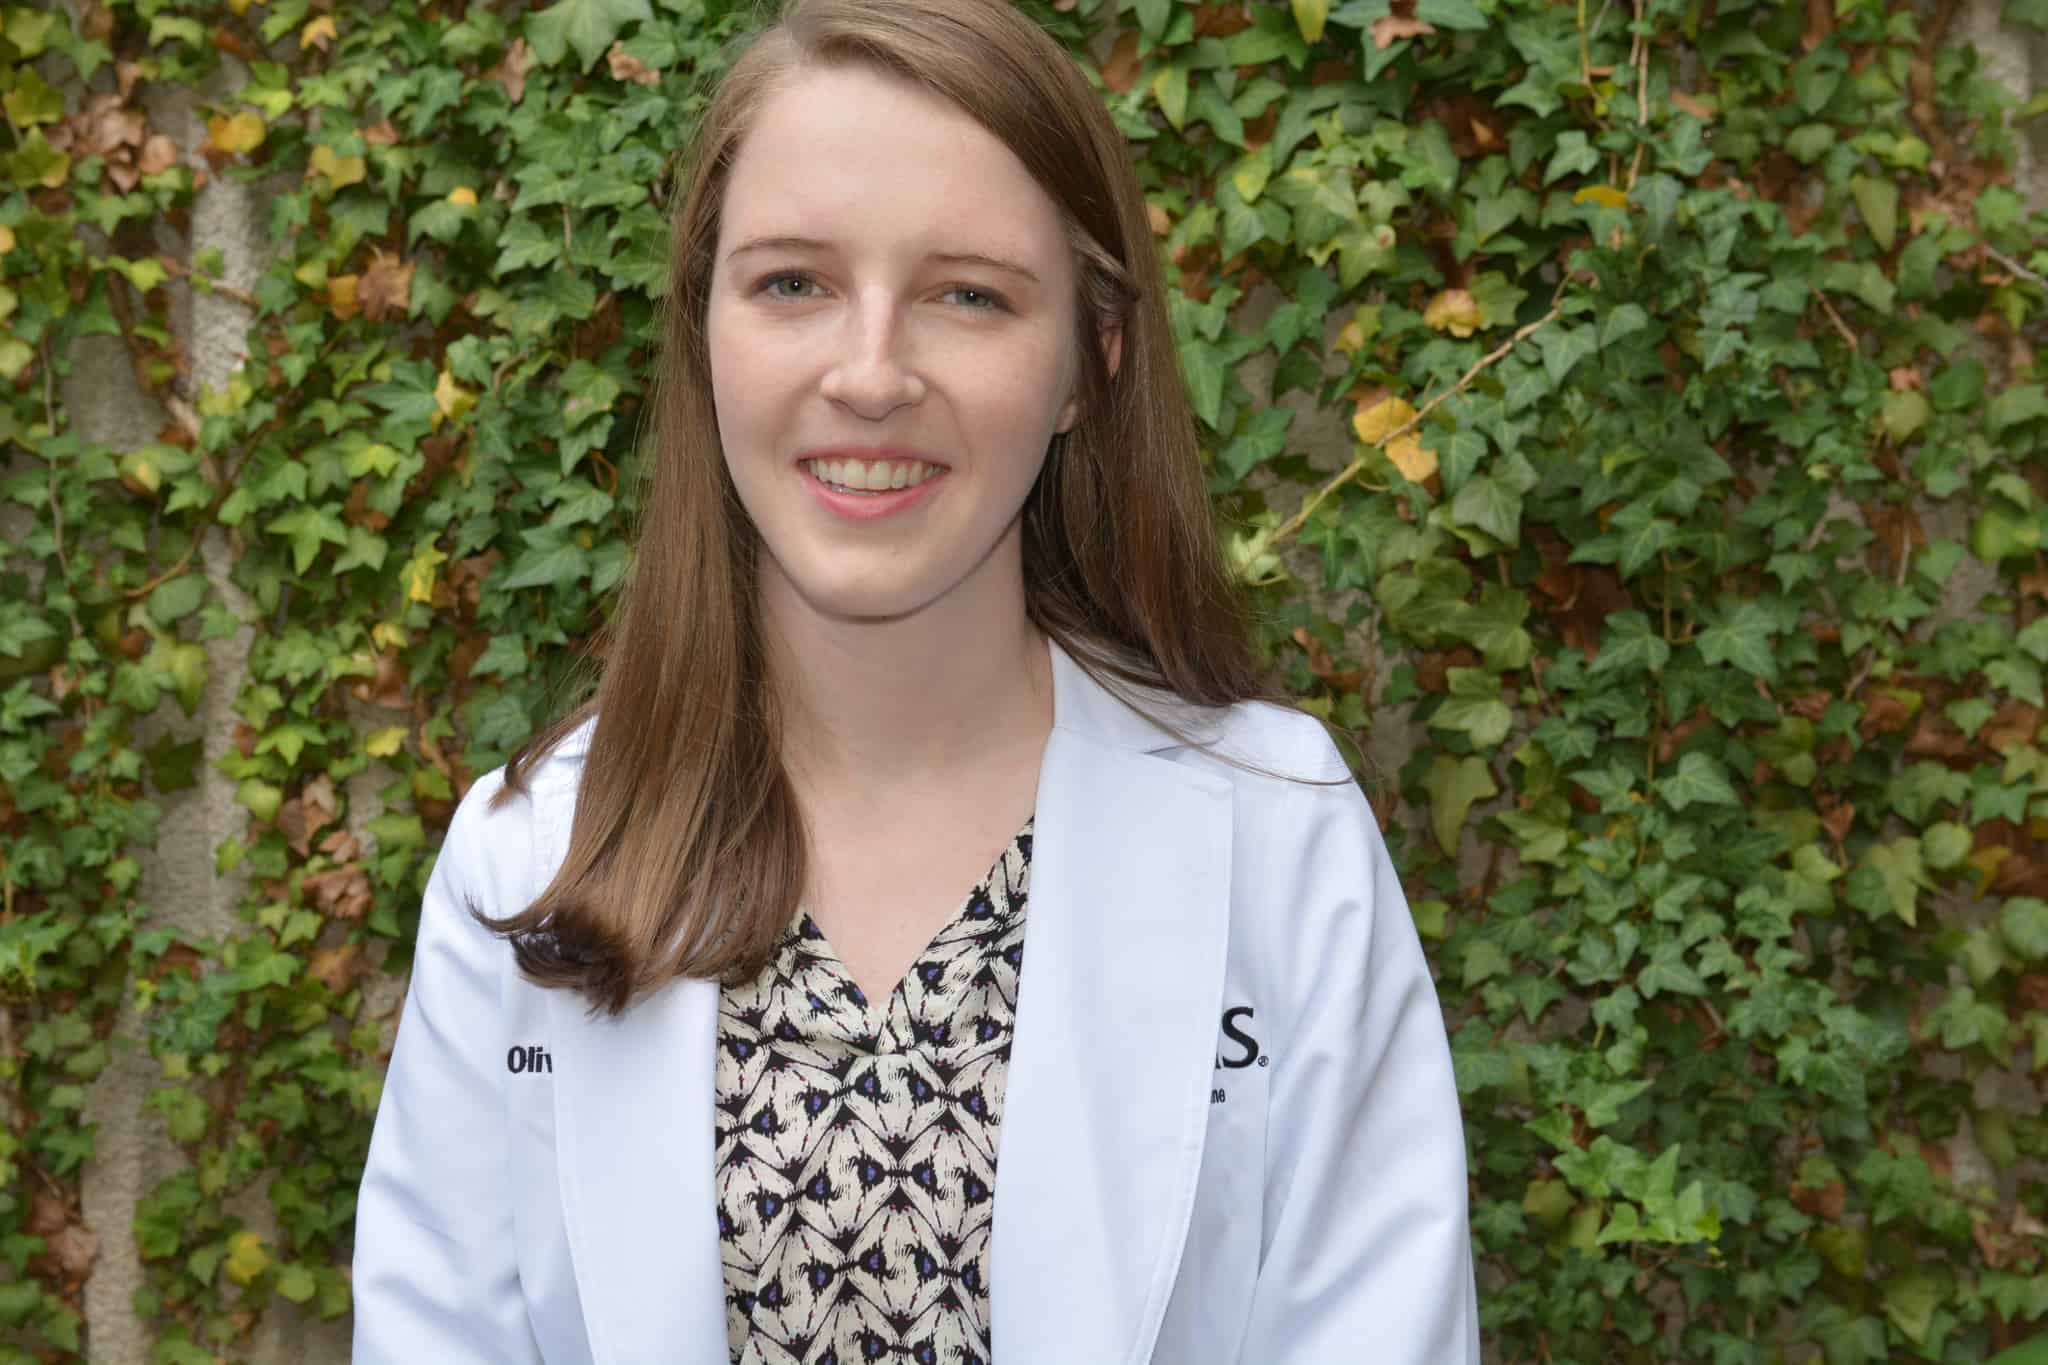 Brasher’s own experiences as a patient with her family pediatrician inspired her to become a doctor.